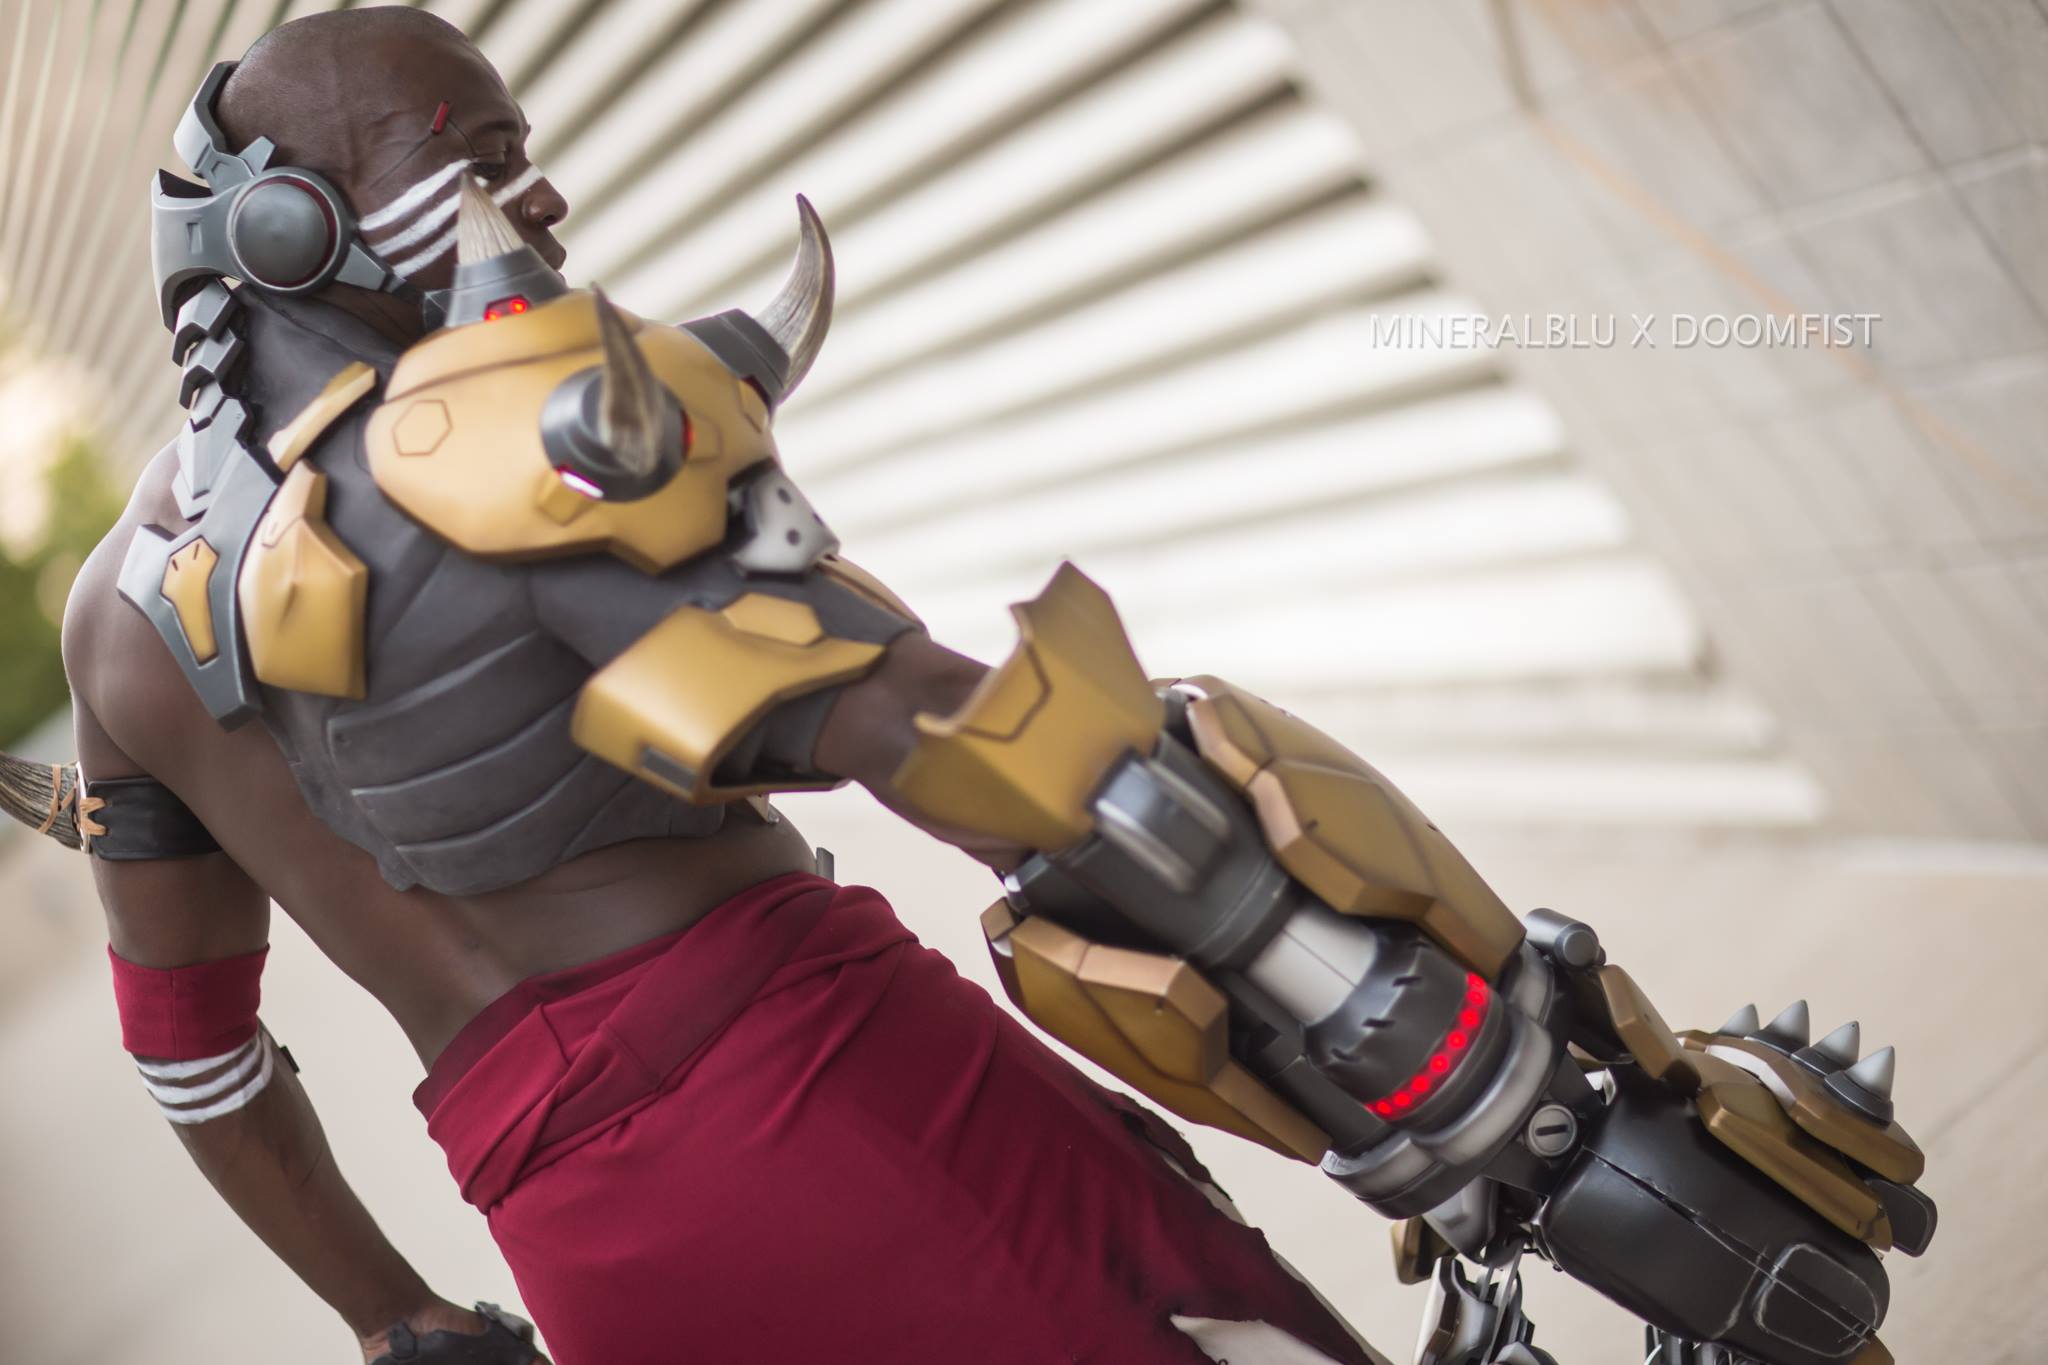 Blizzard’s Official Doomfist Cosplay Is Incredible